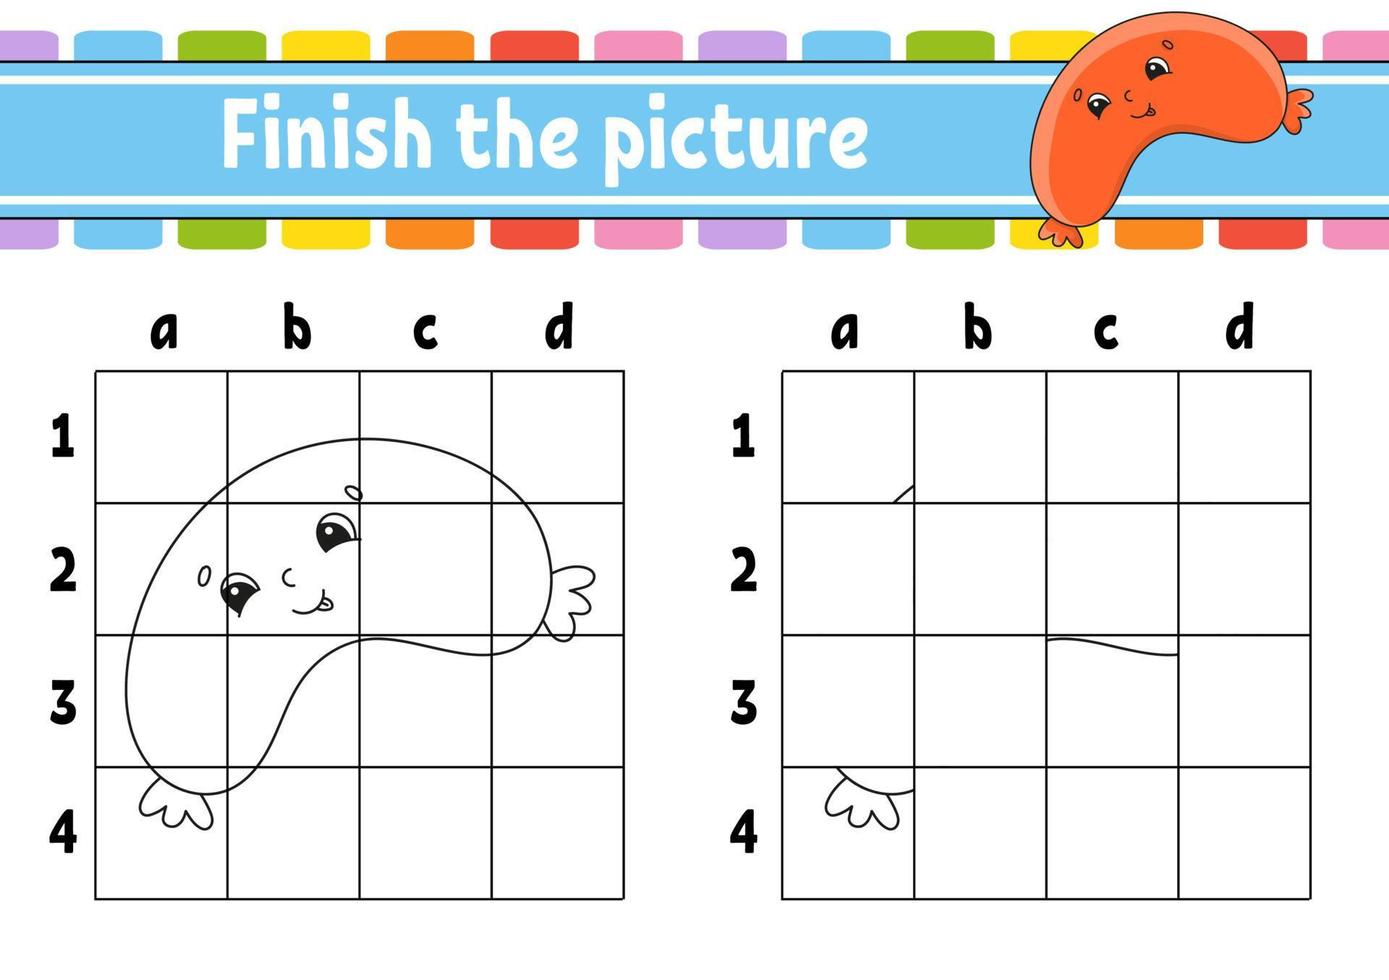 Finish the picture. Coloring book pages for kids. Education developing worksheet. Game for children. Handwriting practice. cartoon character. Vector illustration. Barbecue theme.